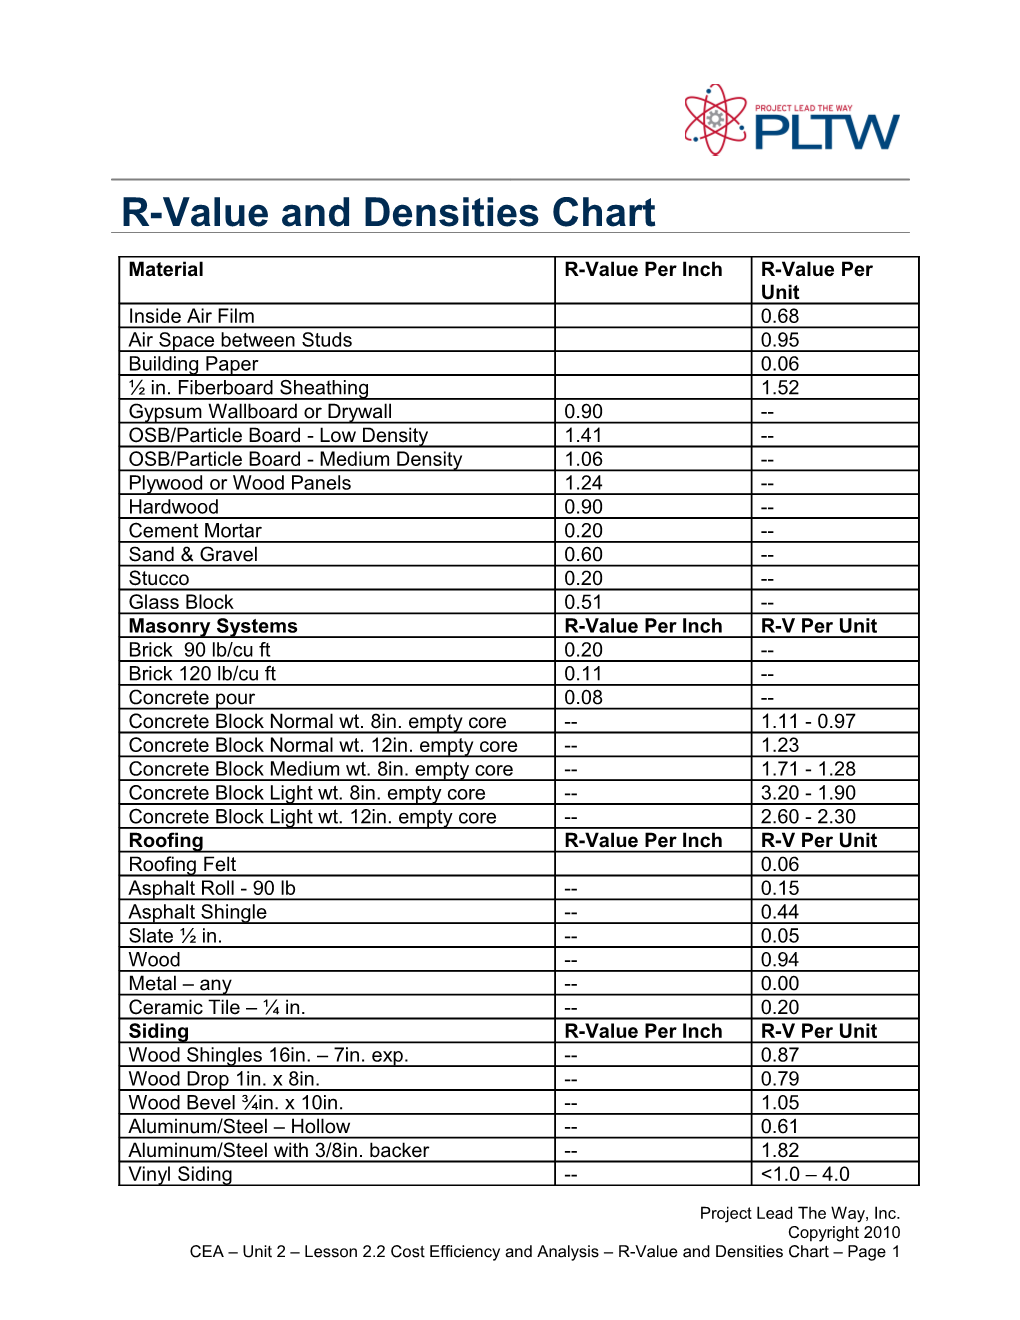 R-Value and Densities Chart